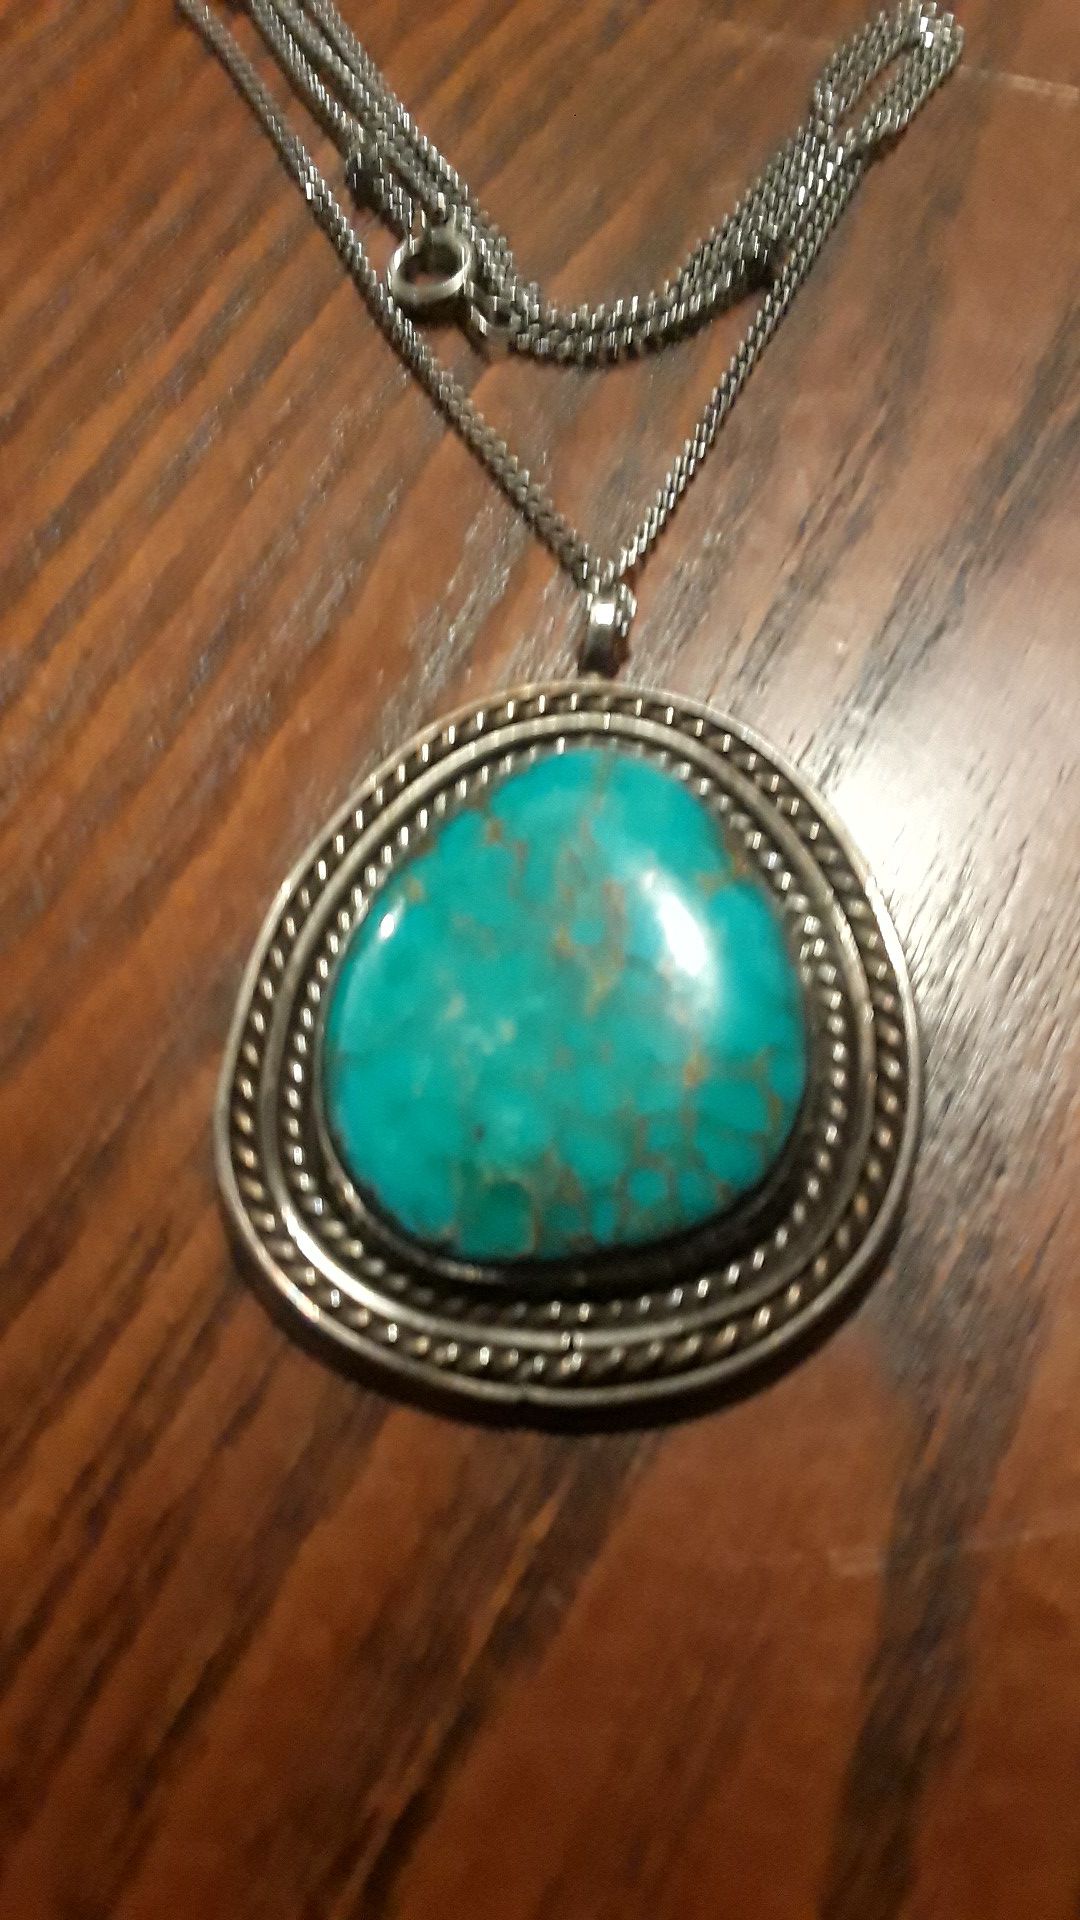 Absolutely Gorgeous Sterling Silver 925 Large Turquoise stone pendant with Sterling Silver 925 necklace.